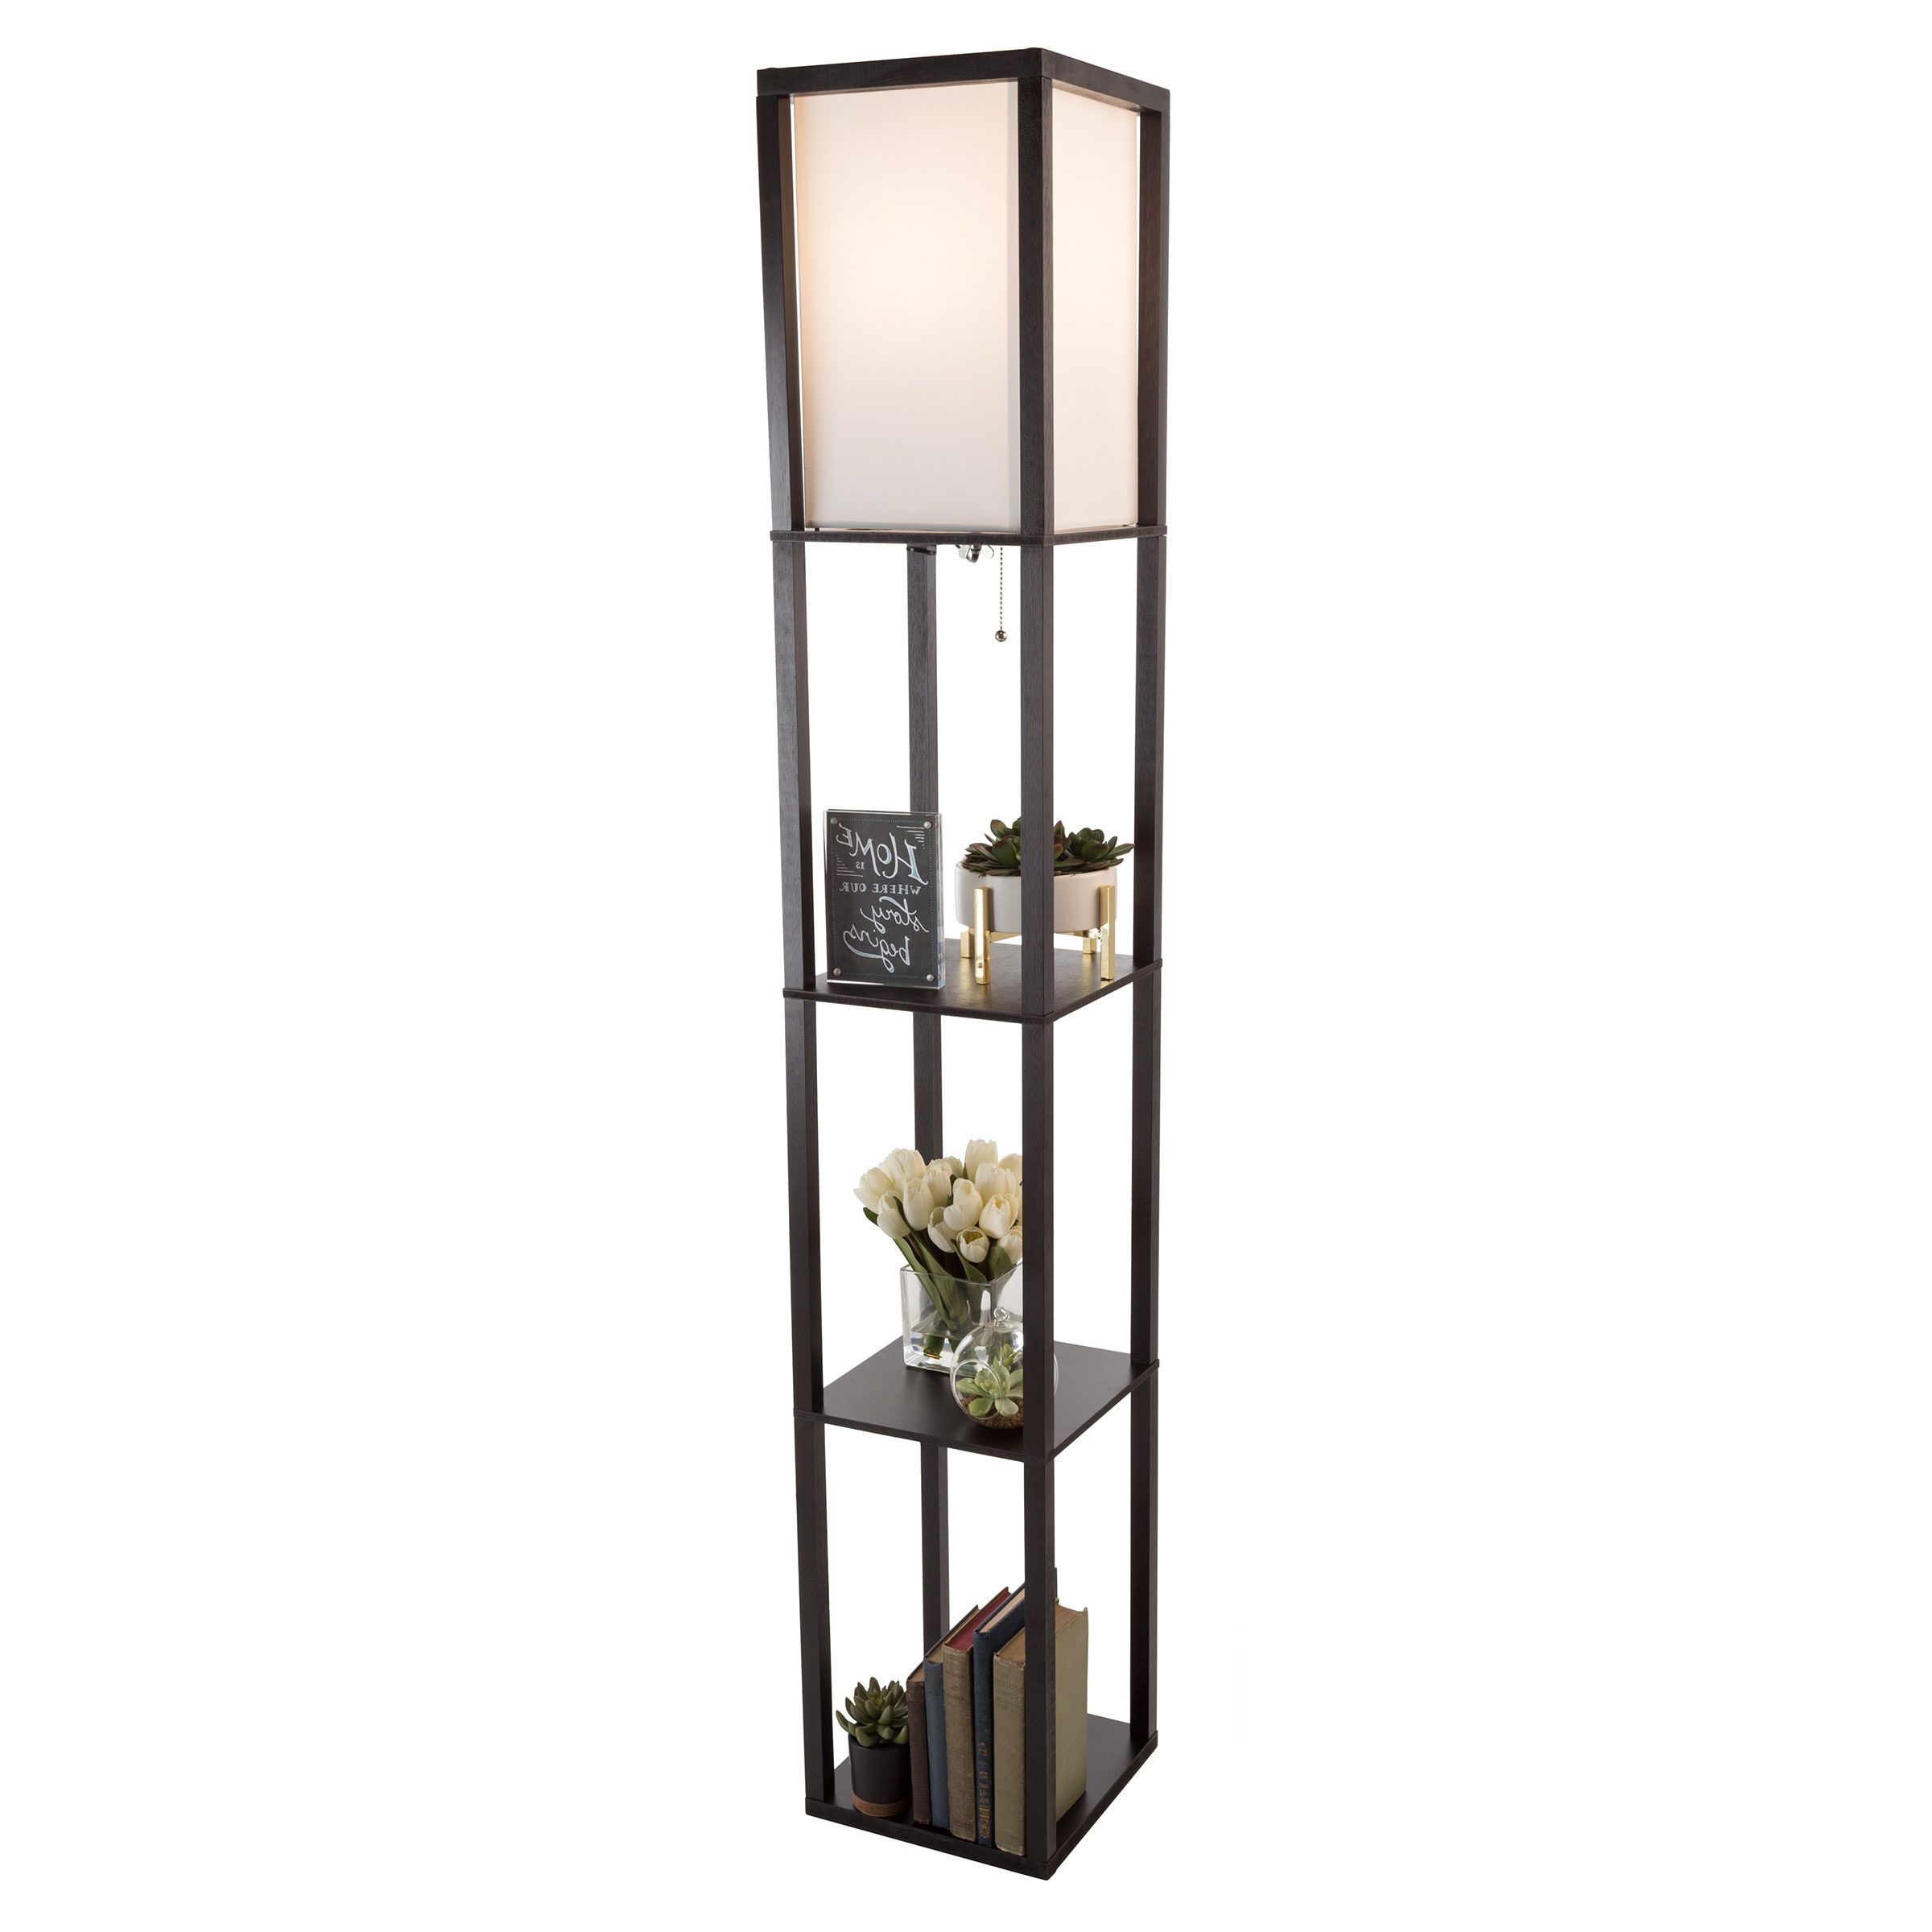 Hastings Home Led Floor Lamp With 3 Shelves, Black  (View 13 of 20)